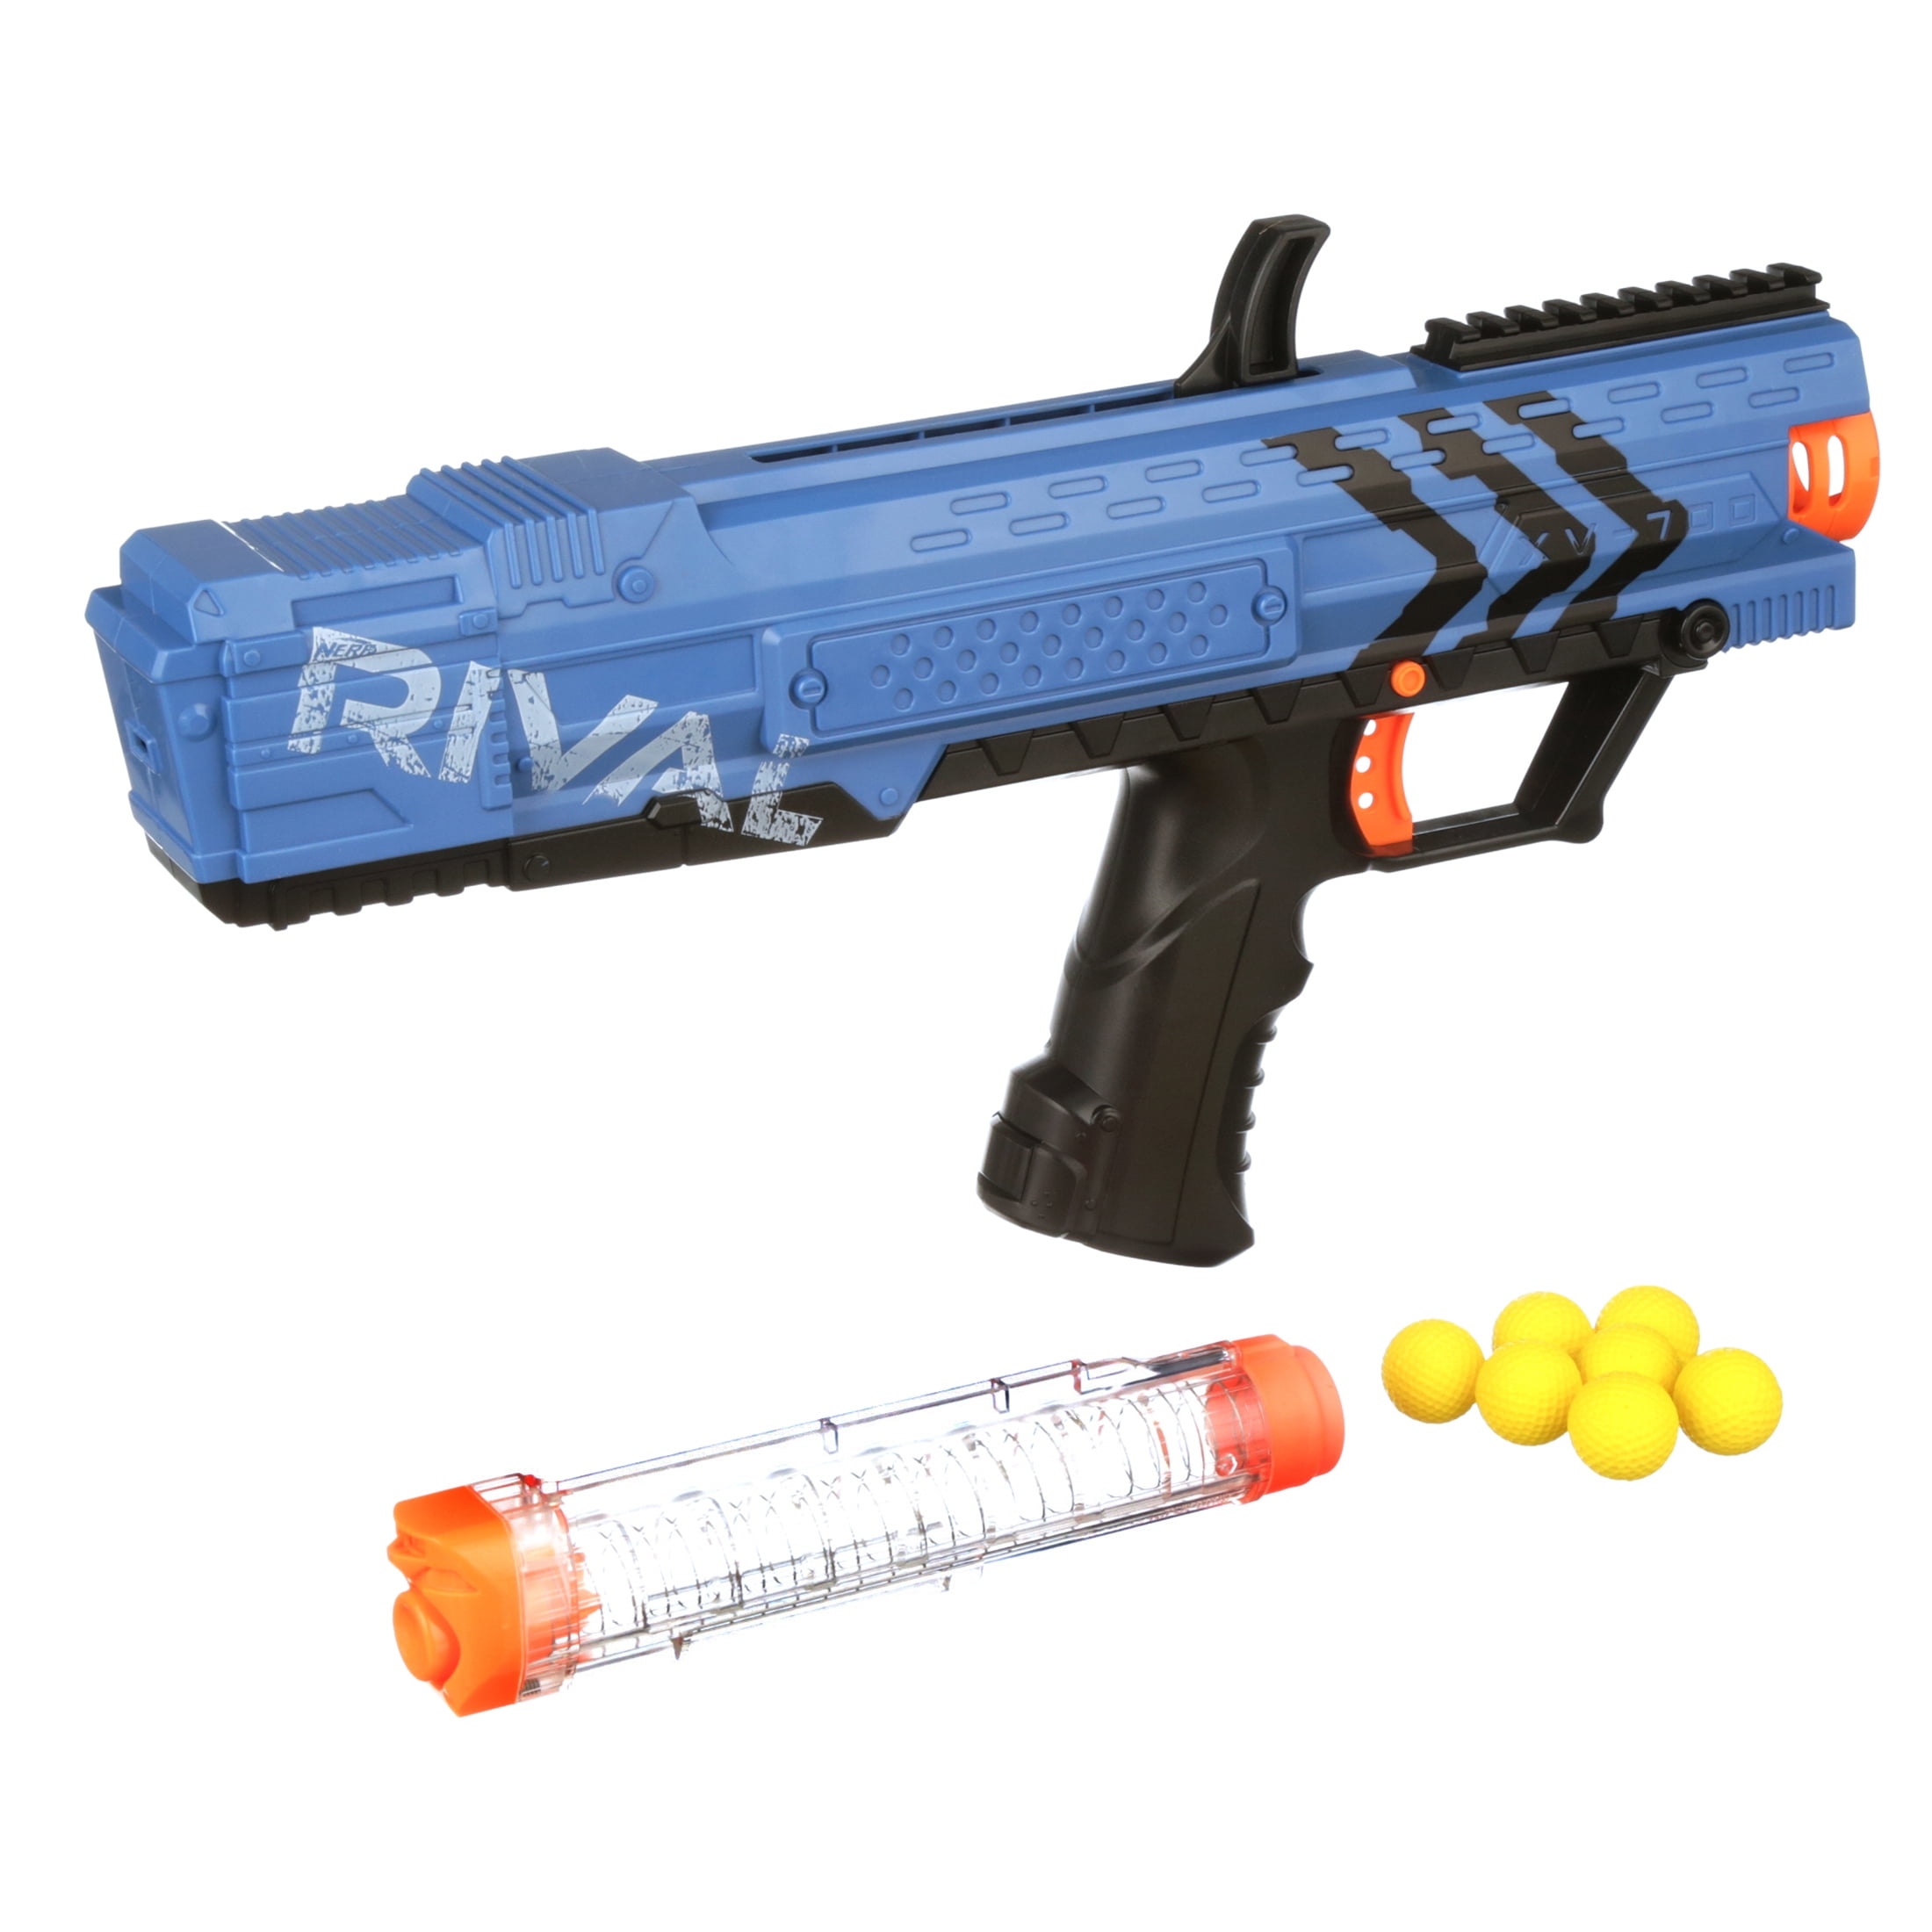 New Nerf Rival 25x High Impact Balls Hasbro Free Shipping ROUNDS REFILL Ammo Toy 